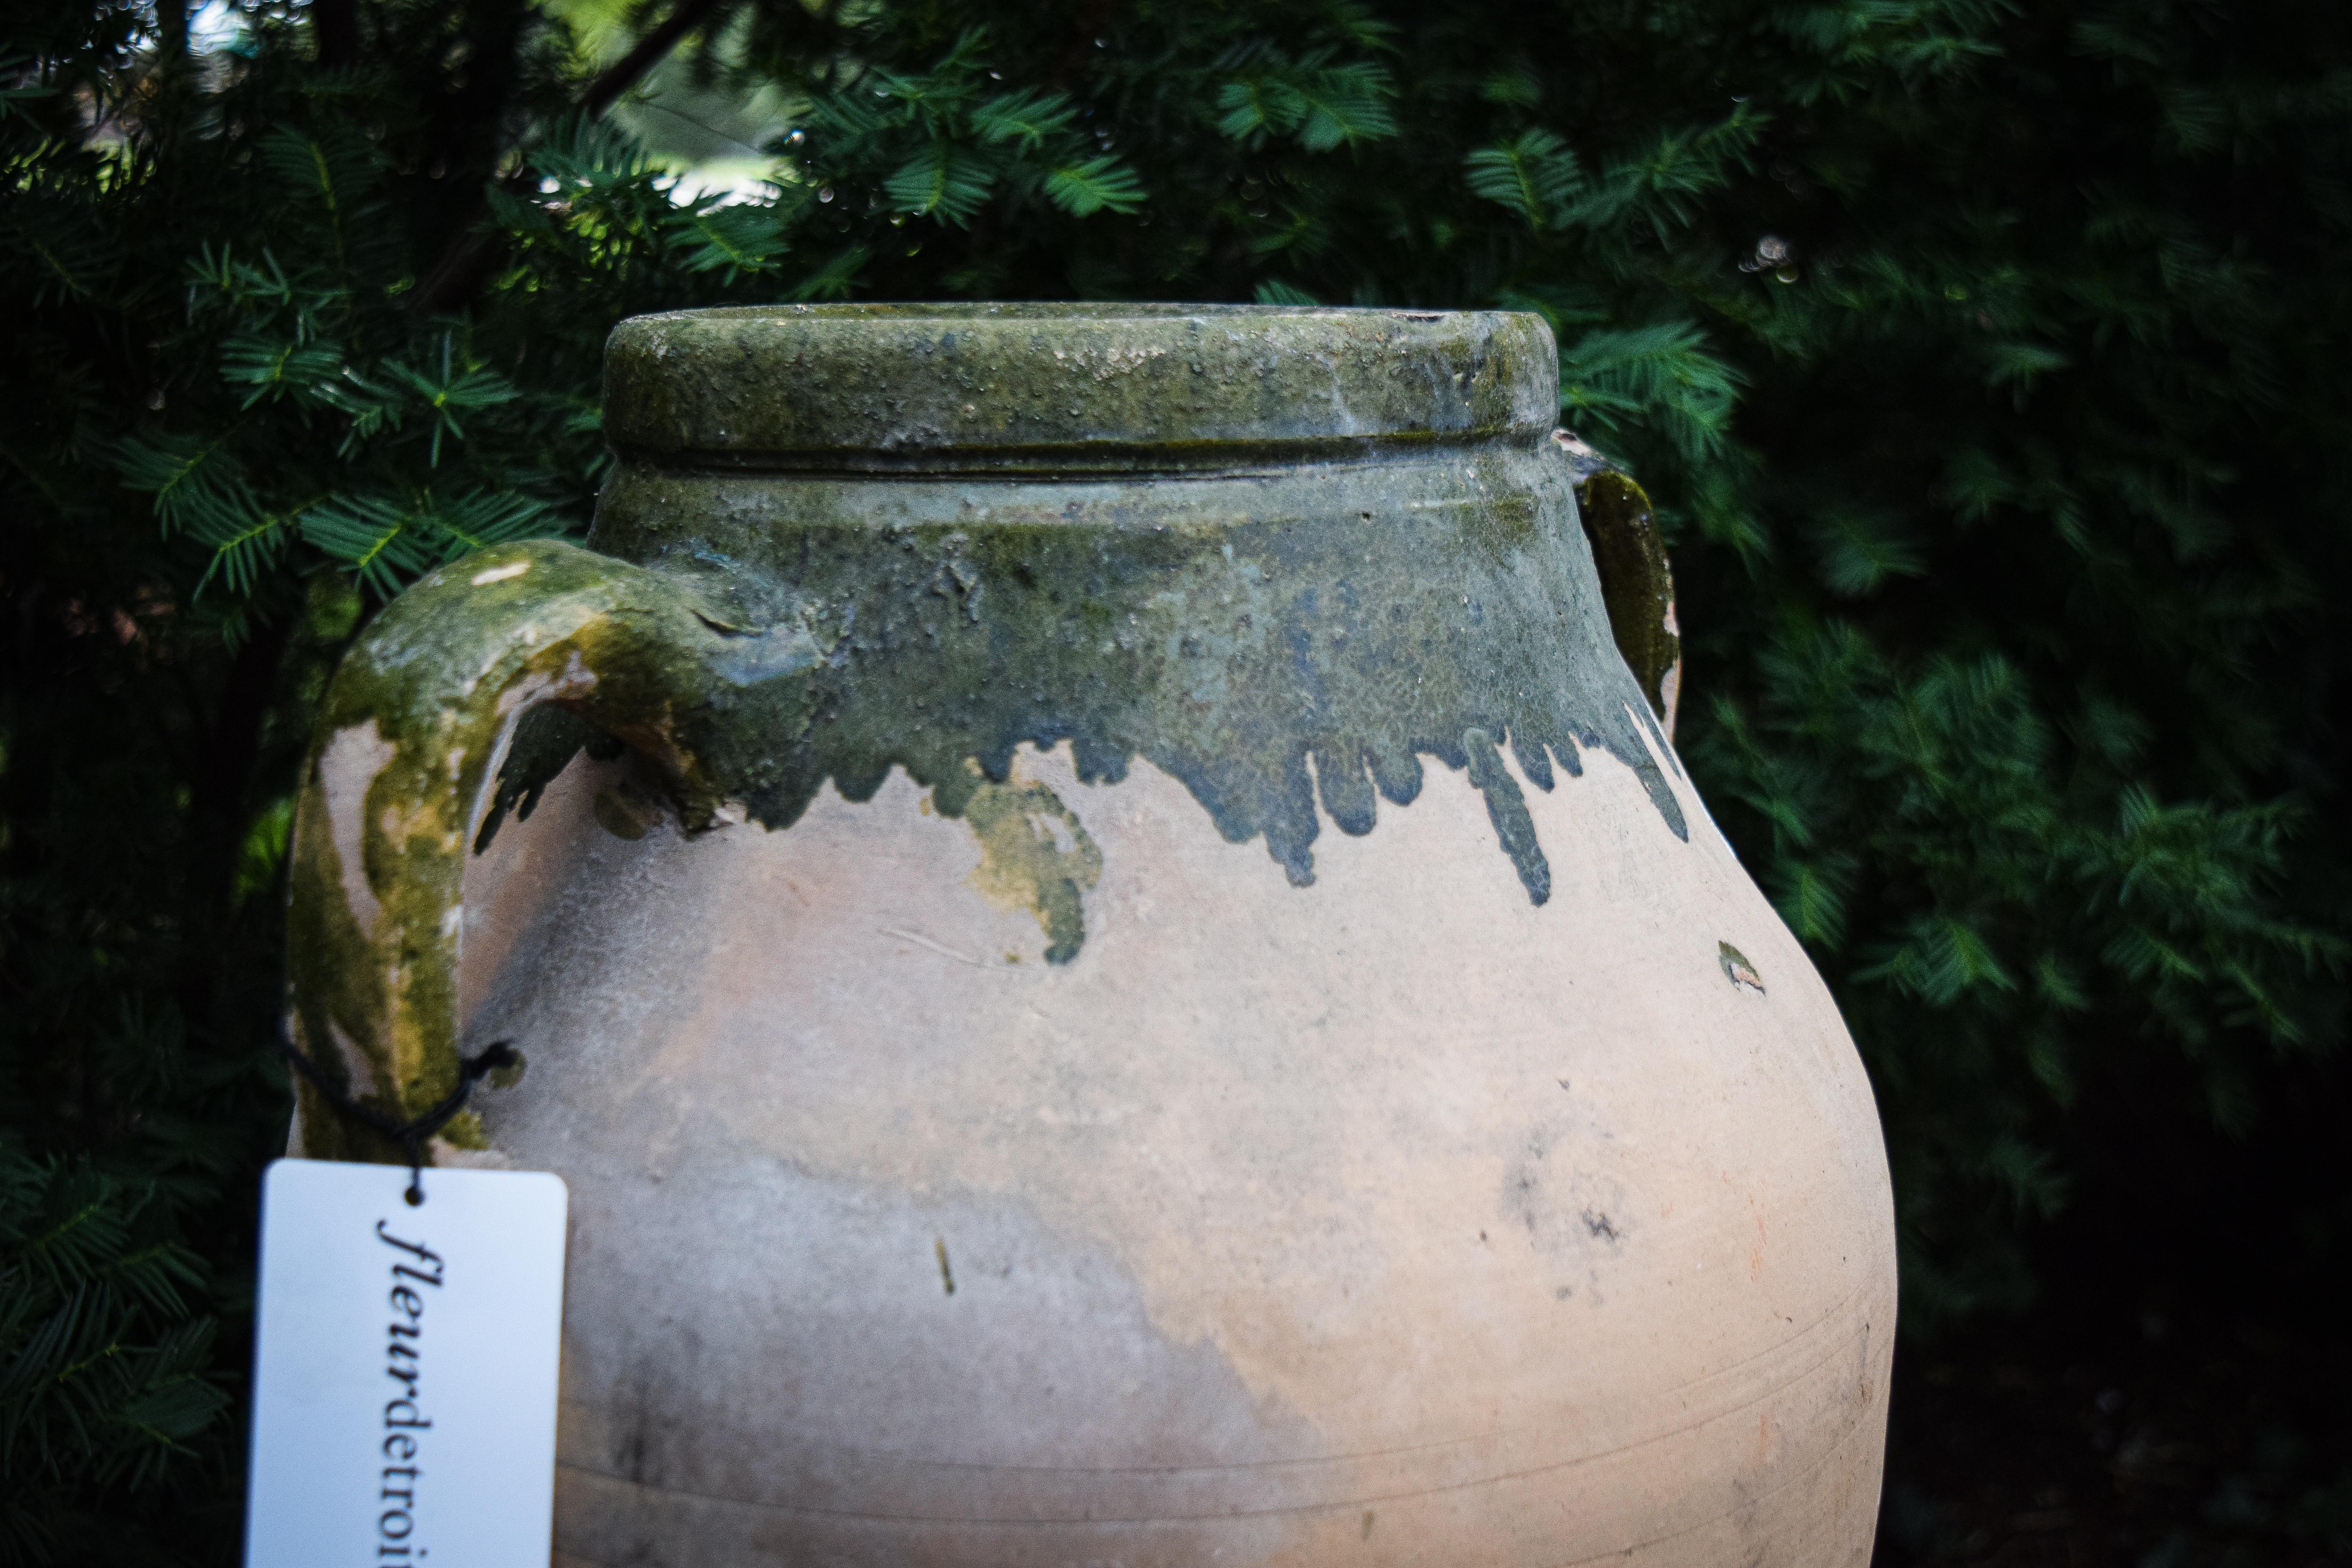 Enhance your space with classic European style featured in this antique olive jar. Featuring remnants of green glaze at the top artfully applied and preserved with perfect weathering. Evoking old world aesthetic, this jar has a distinctive style